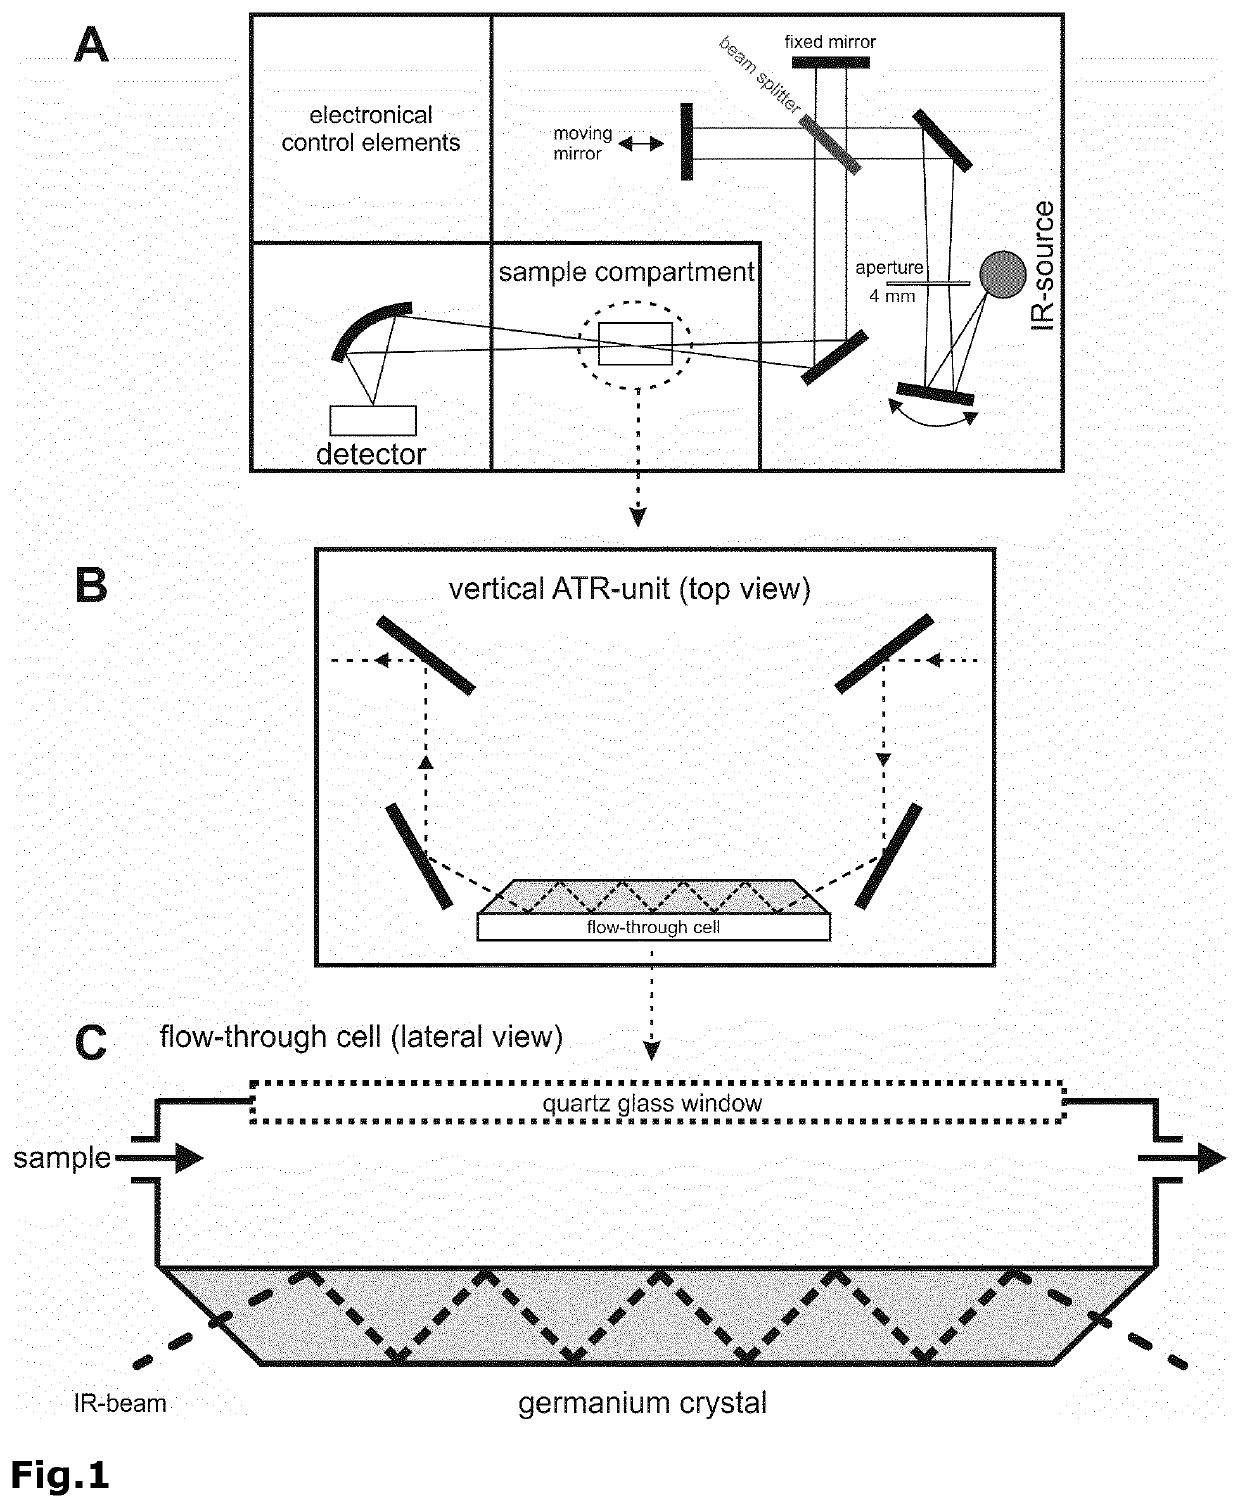 Biosensor for Conformation and Secondary Structure Analysis